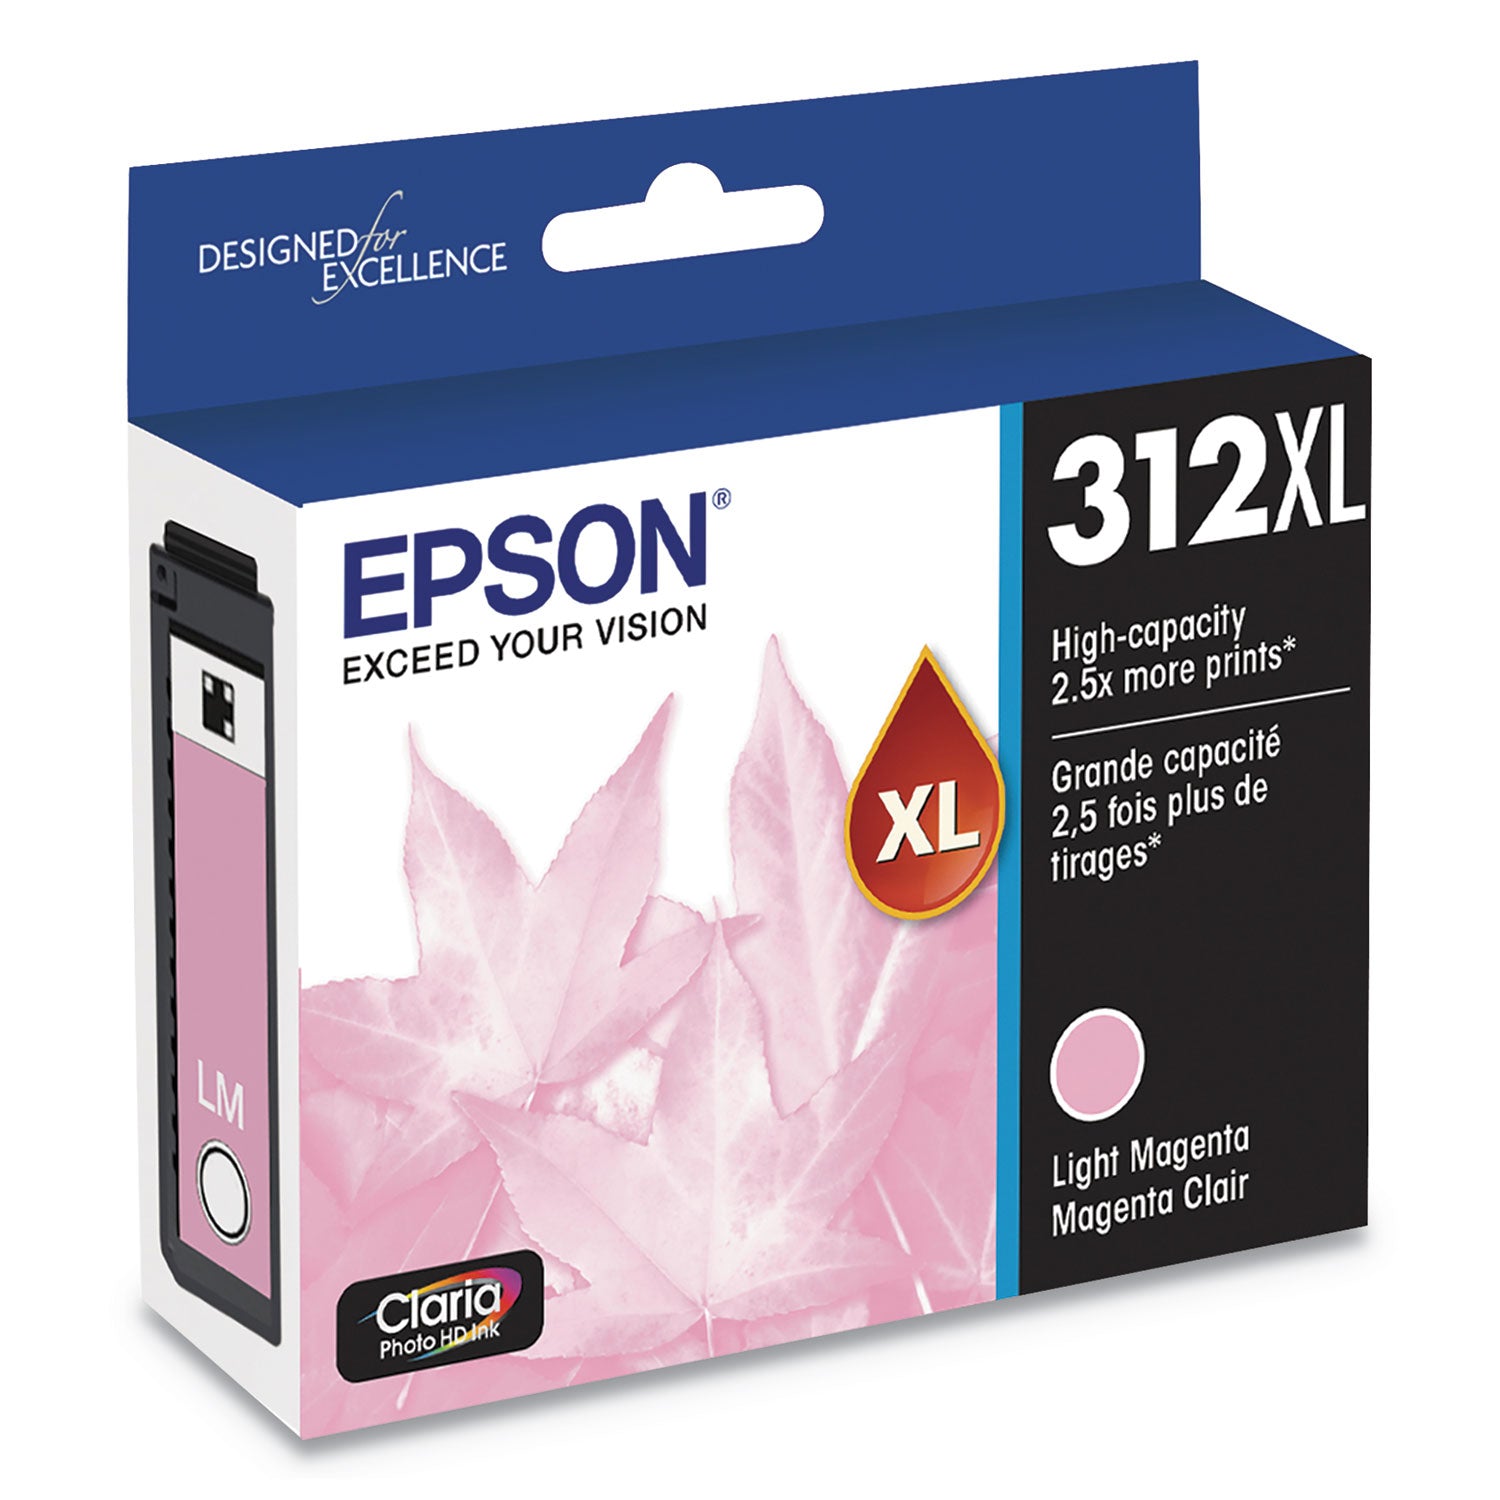 t312xl620-s-312xl-claria-high-yield-ink-830-page-yield-light-magenta_epst312xl620s - 2